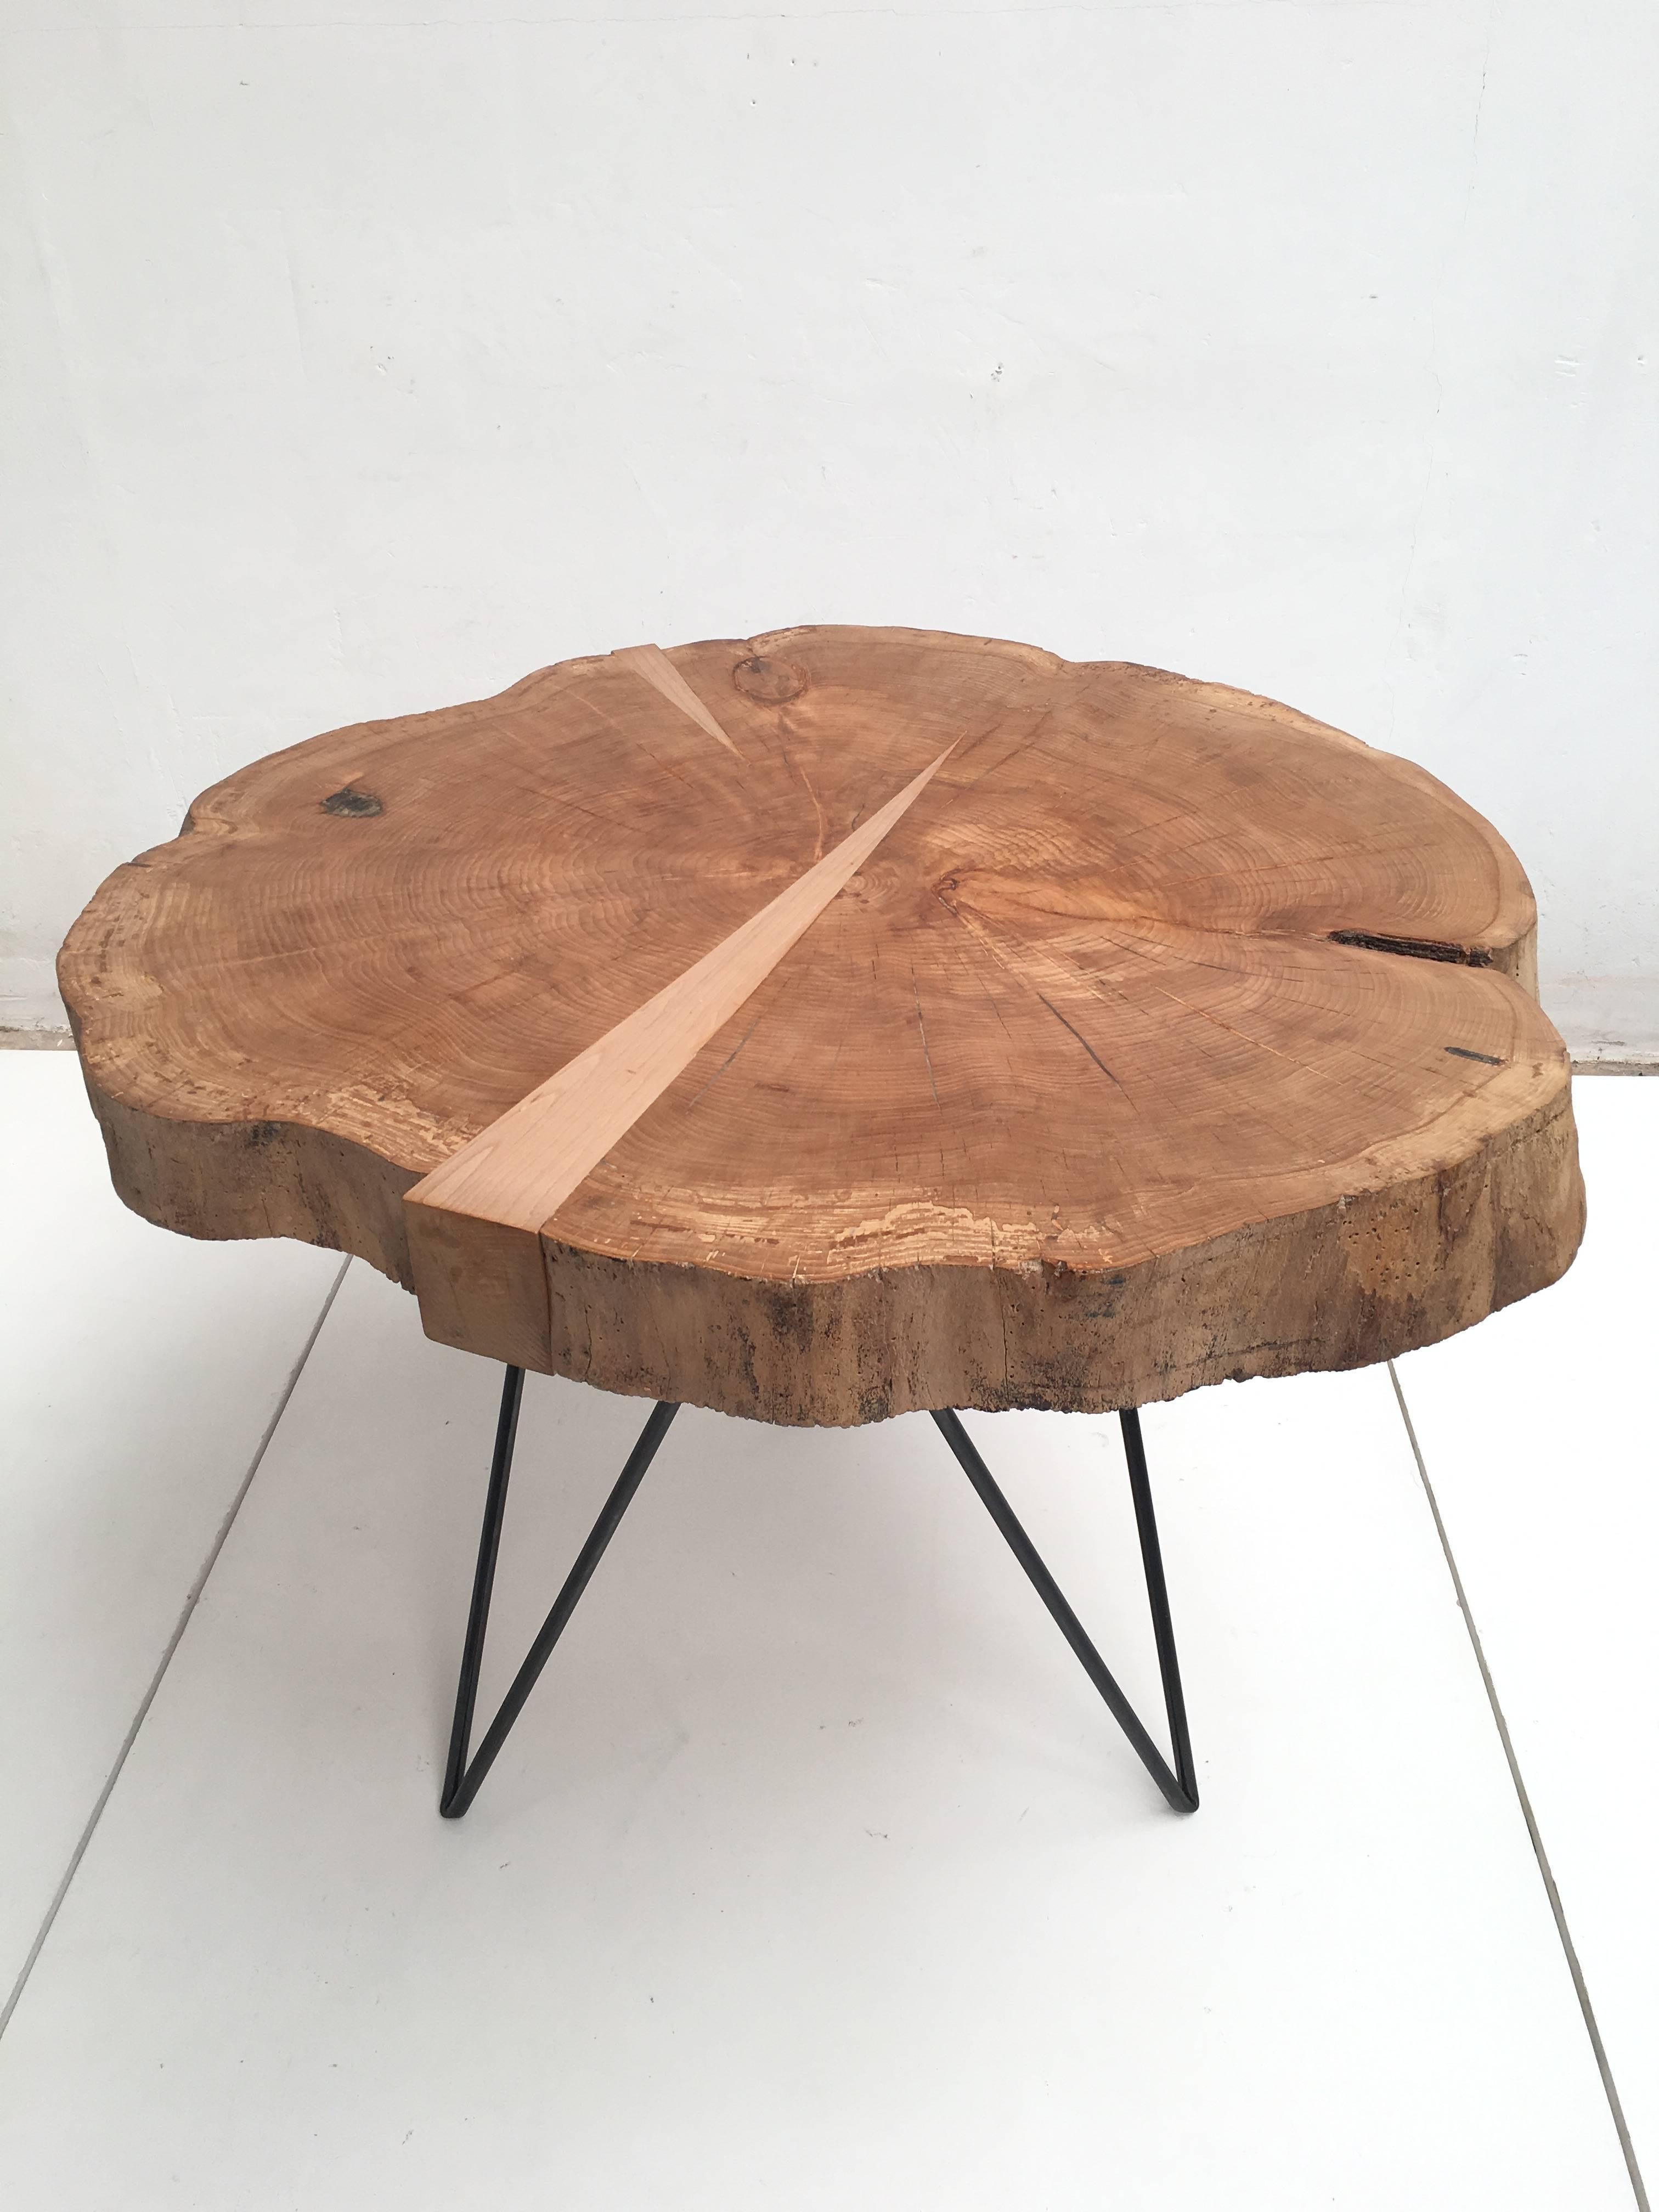 This vintage solid beech slab has been reclaimed from a rustic coffee table from the 1960s

The wood slab has been sandblasted and heat treated first in a 120 degrees celsius oven overnight to make sure any living organisms inside were killed

A